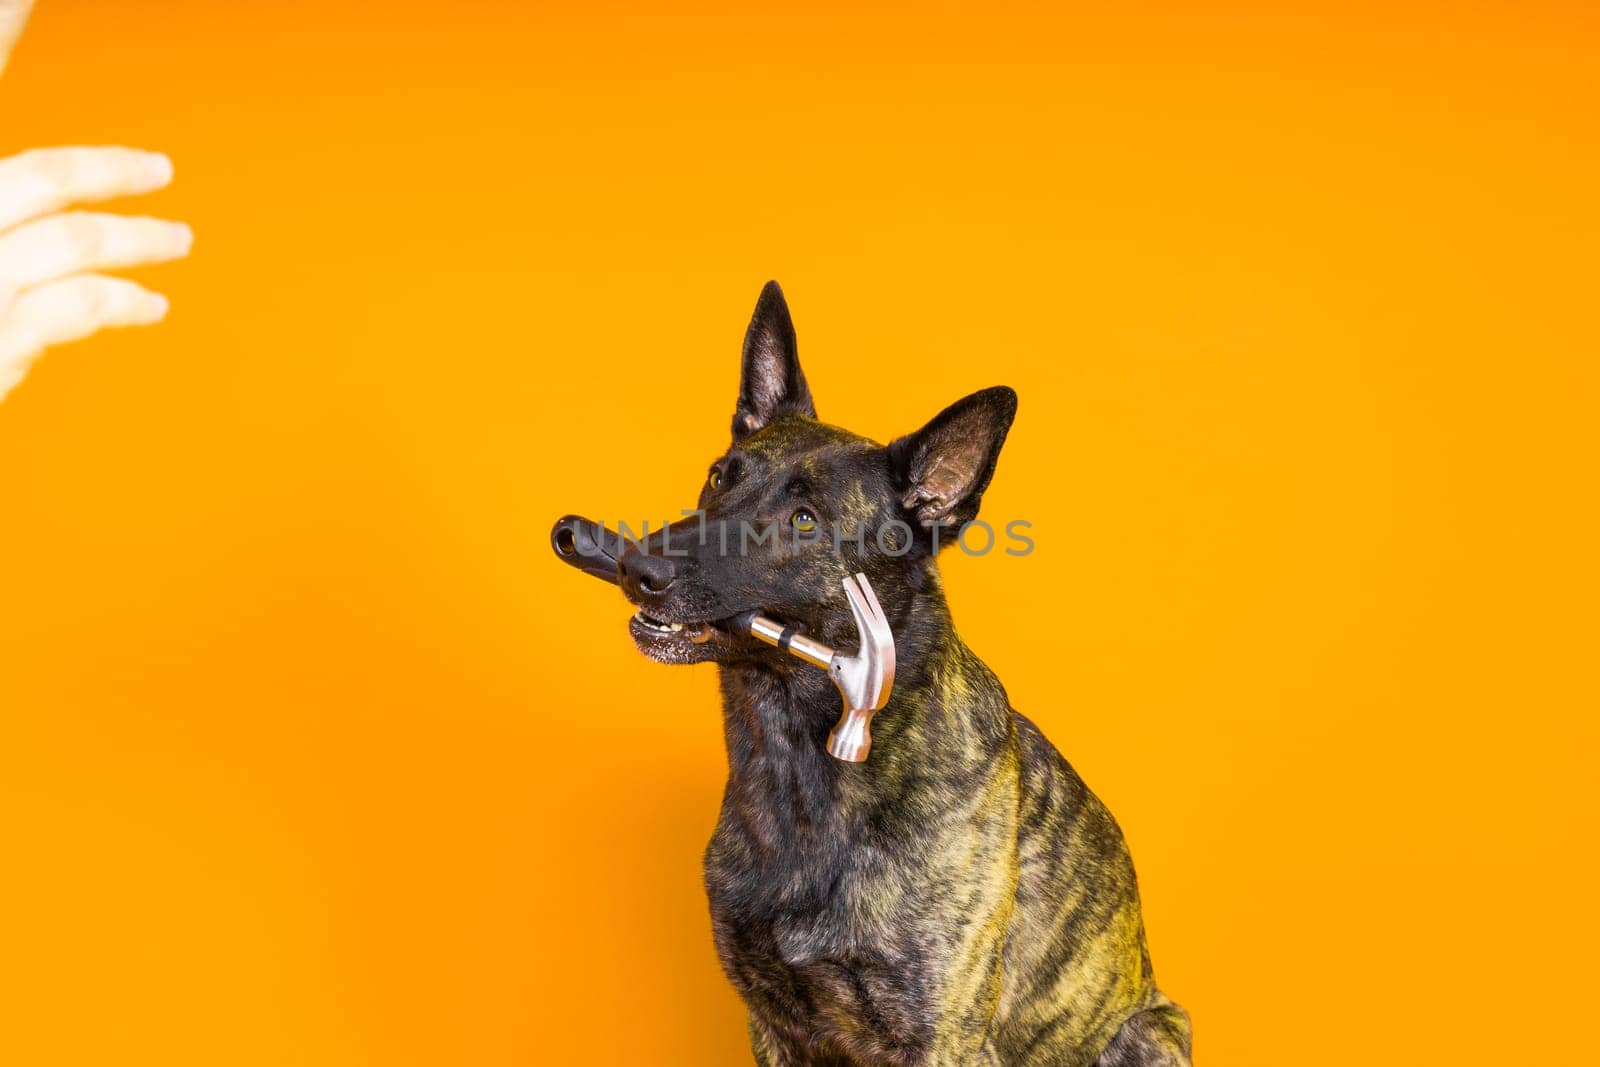 Dog with hammer isolated on red and yellow background by Zelenin